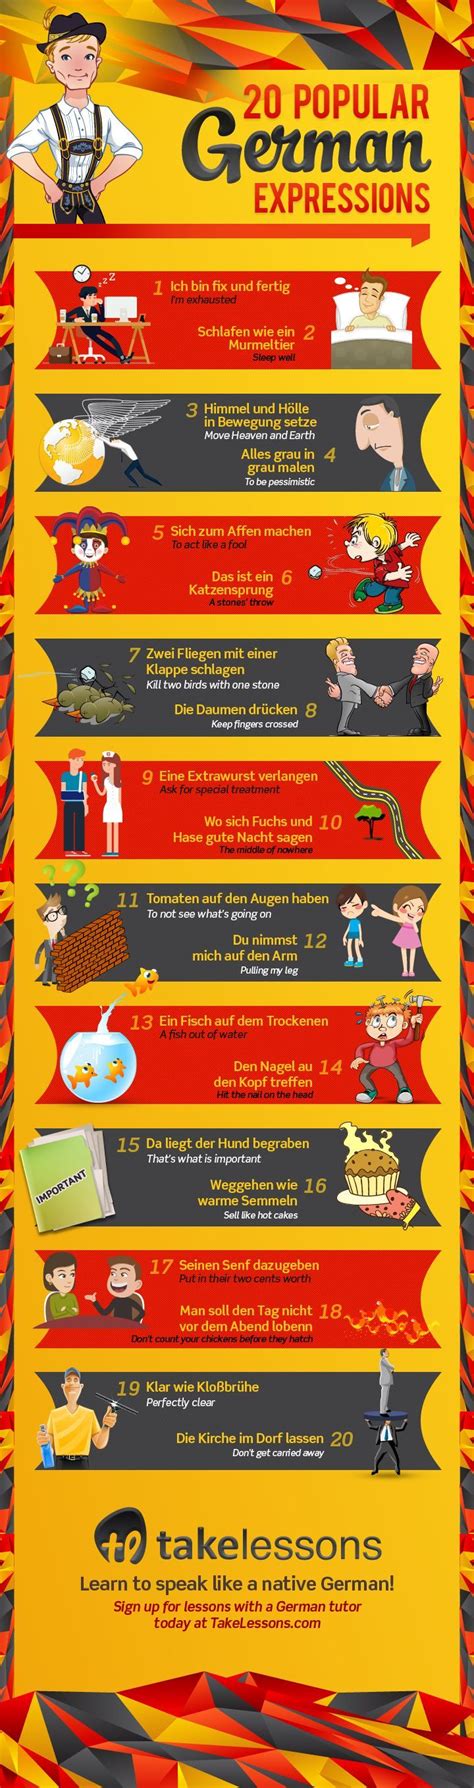 20 Popular German Expressions And What They Mean Infographic